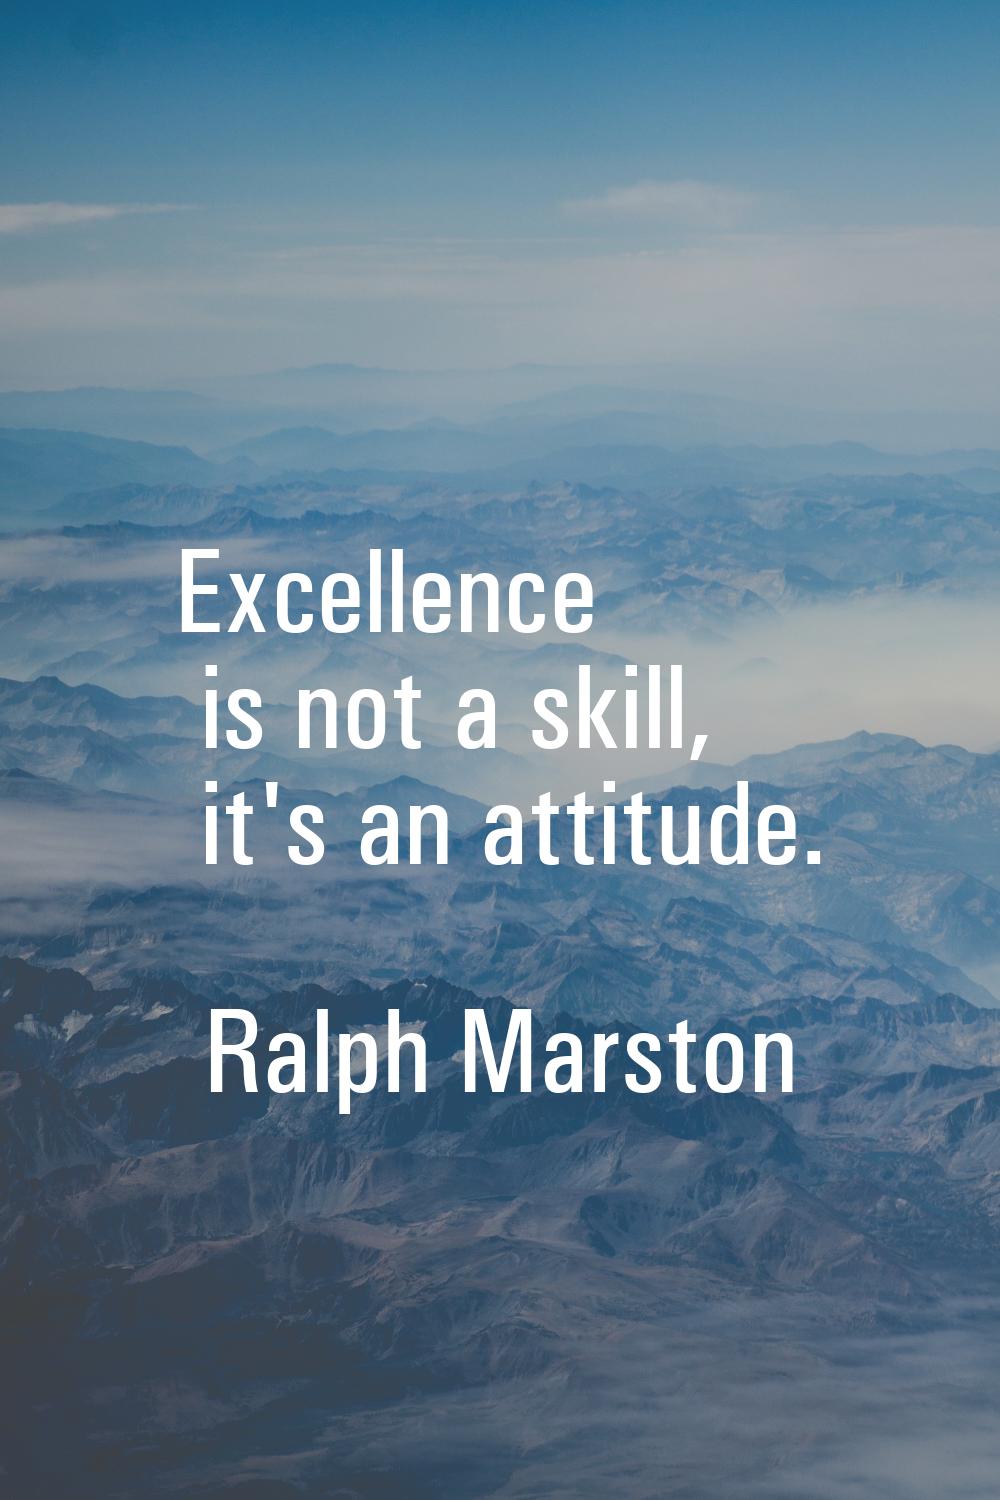 Excellence is not a skill, it's an attitude.